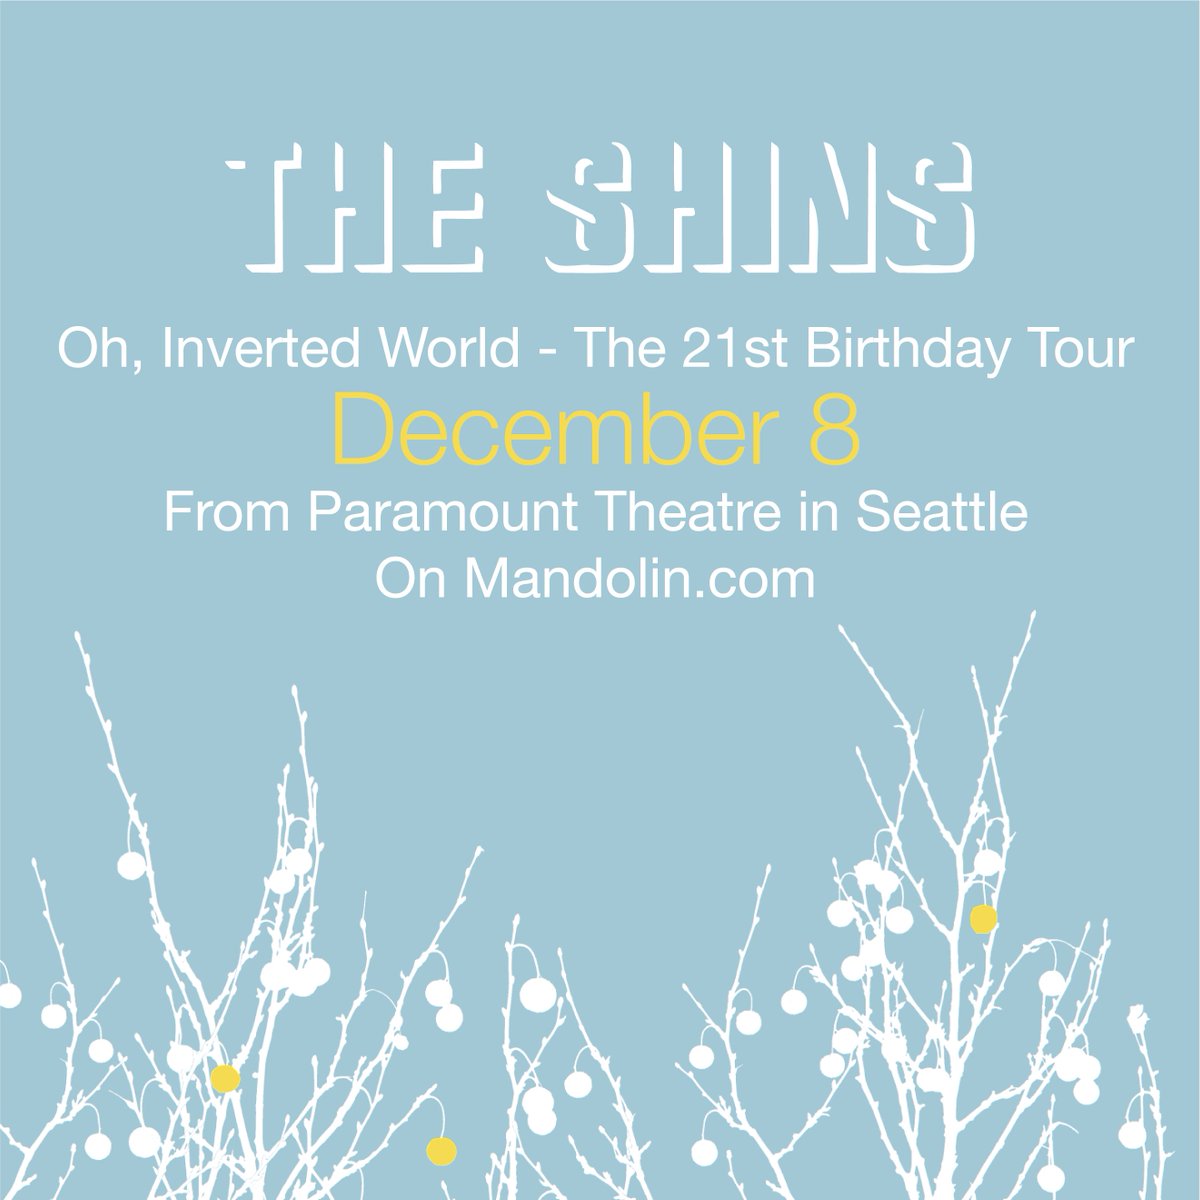 We miss you! If you missed us on tour or just want to relive the experience from the comfort of your couch, you’re in luck because we filmed our show in Seattle and we are livestreaming it on Thursday, December 8th! Early bird tickets are available now: linktr.ee/theshins